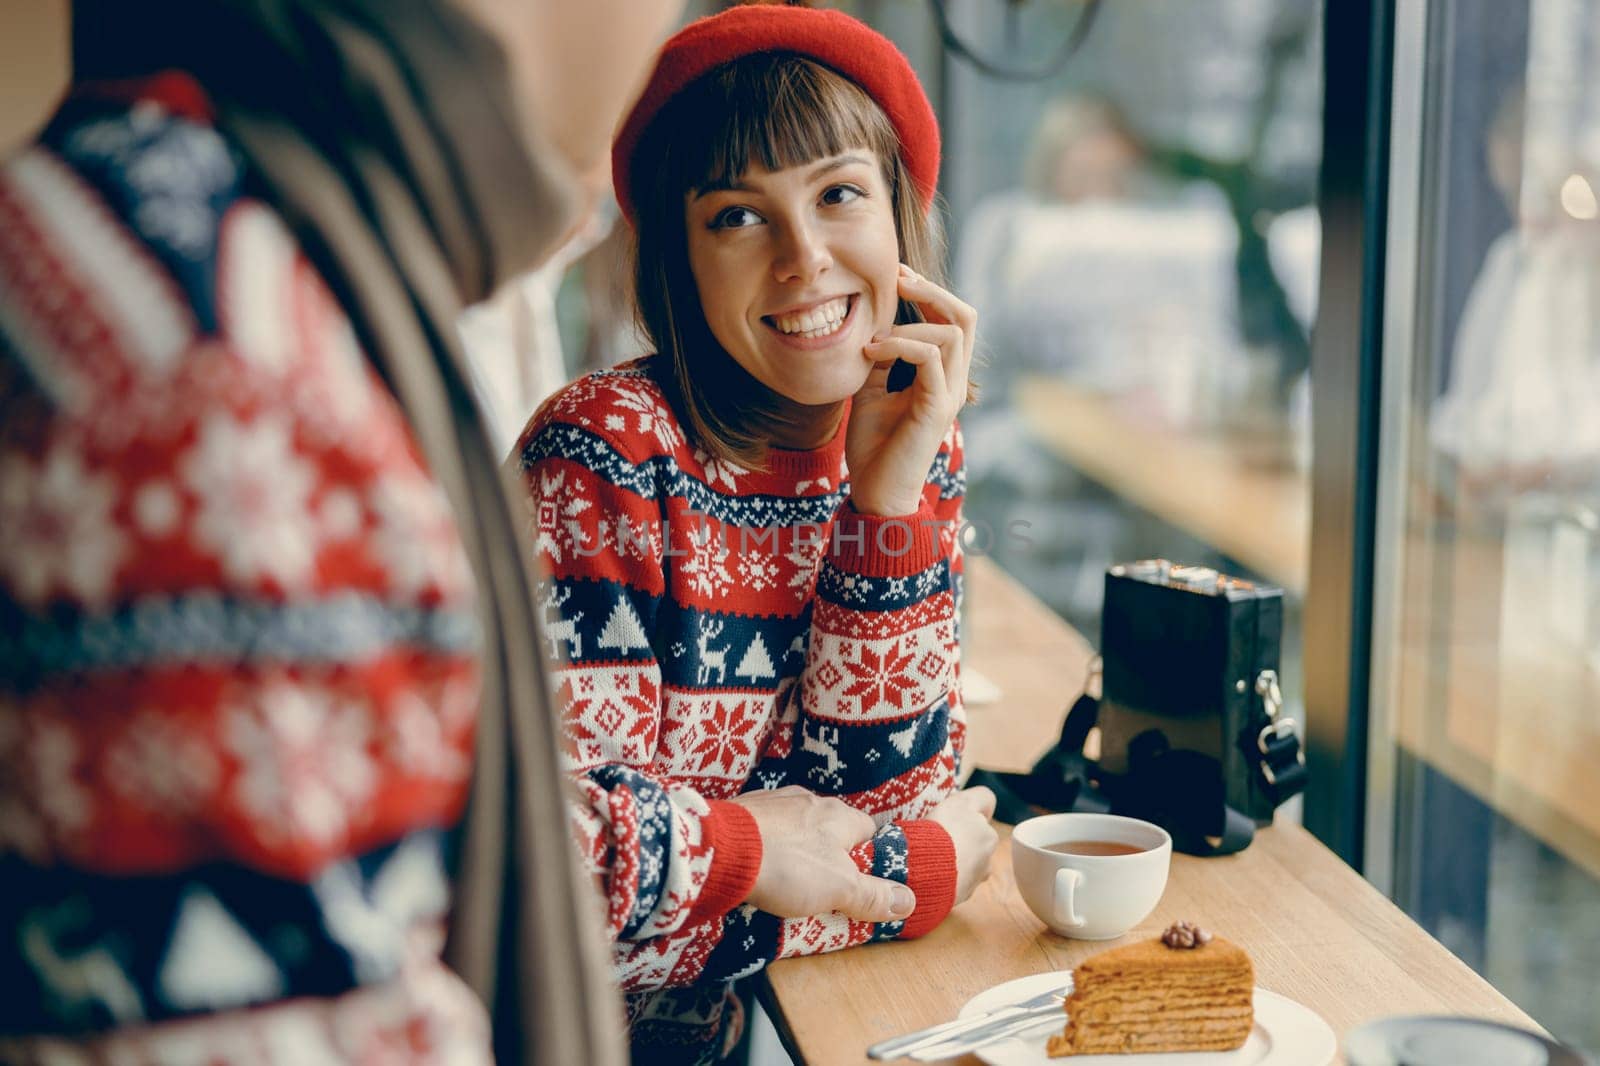 Smiling brightly, a woman in a holiday-themed sweater and red beret enjoys a cozy coffee date, exuding winter cheer